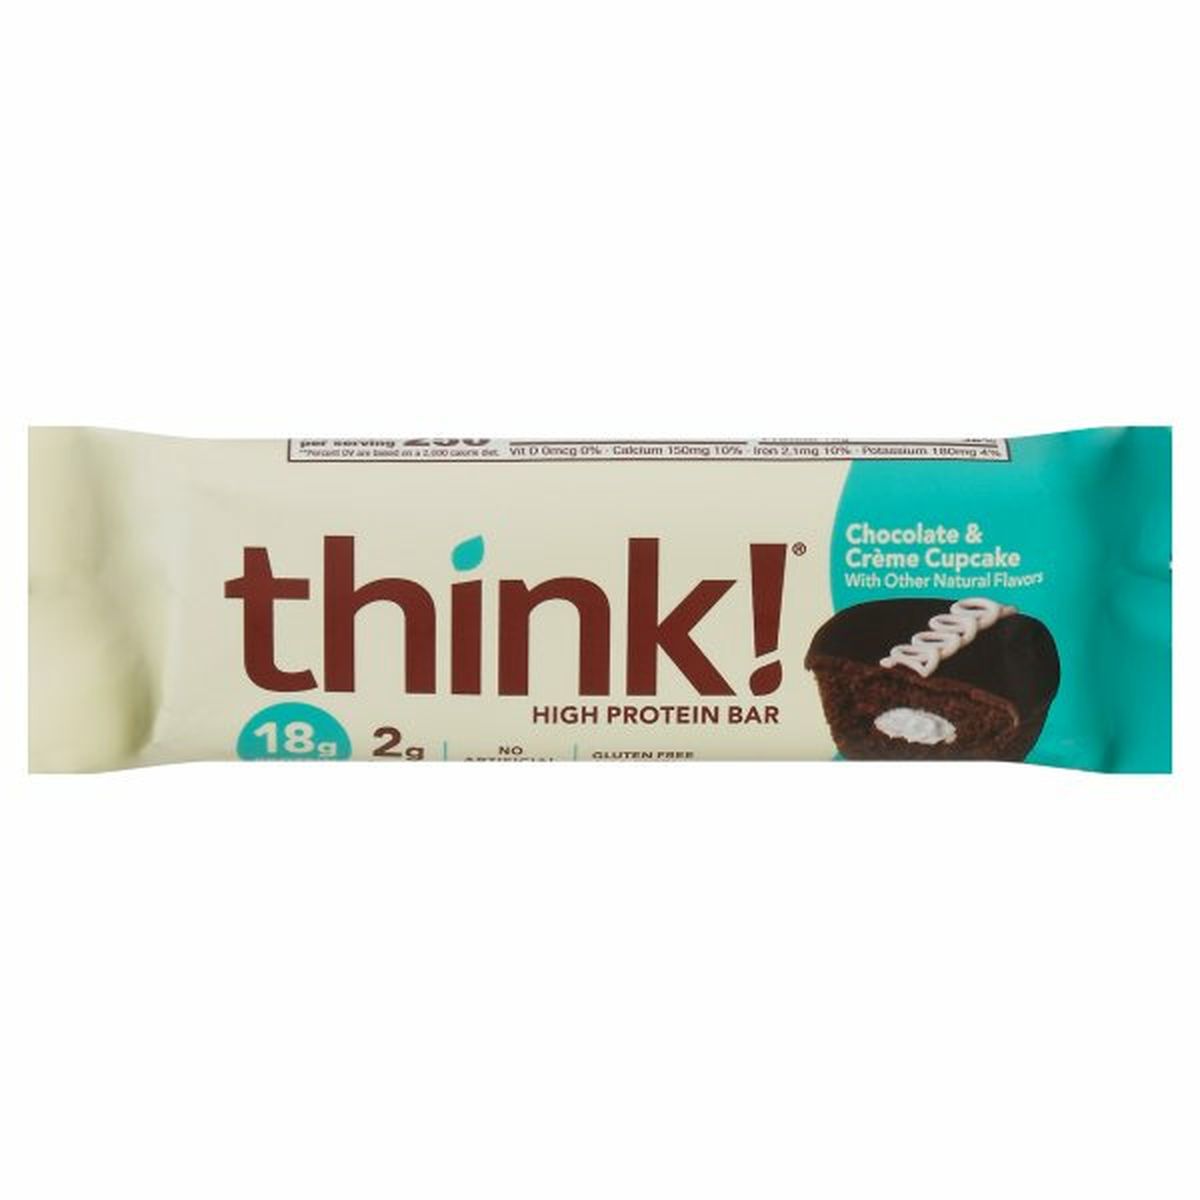 Calories in Think! High Protein Bar, Chocolate & Creme Cupcake